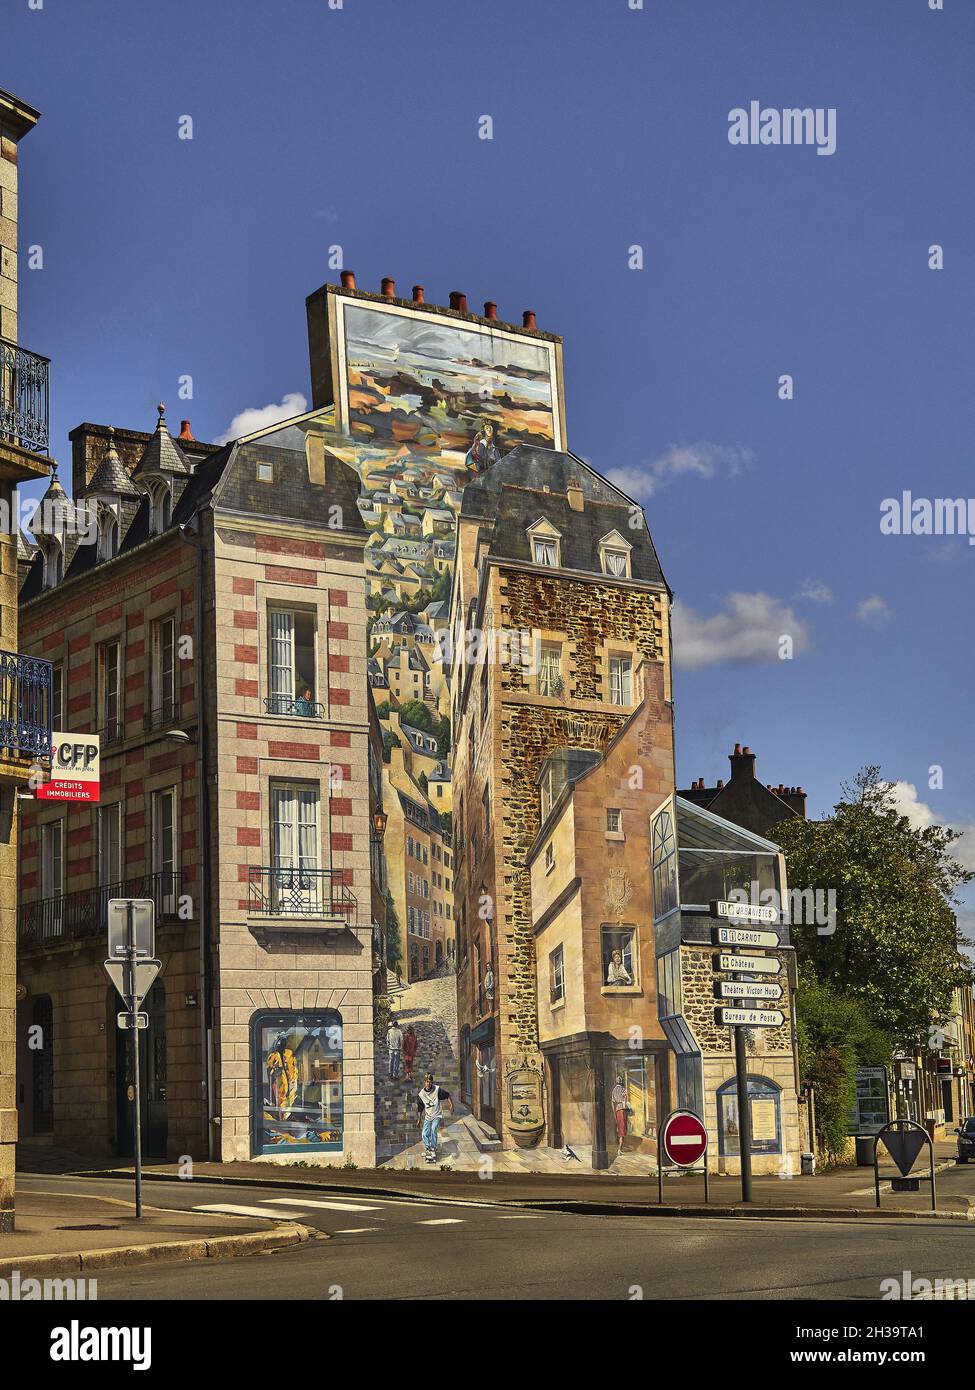 Fougeres city, FranceBrittany; Ille-et-Vilaine department. The small town is dotted with houses with trompe-l'oeil walls or urban frescoes like here. Stock Photo